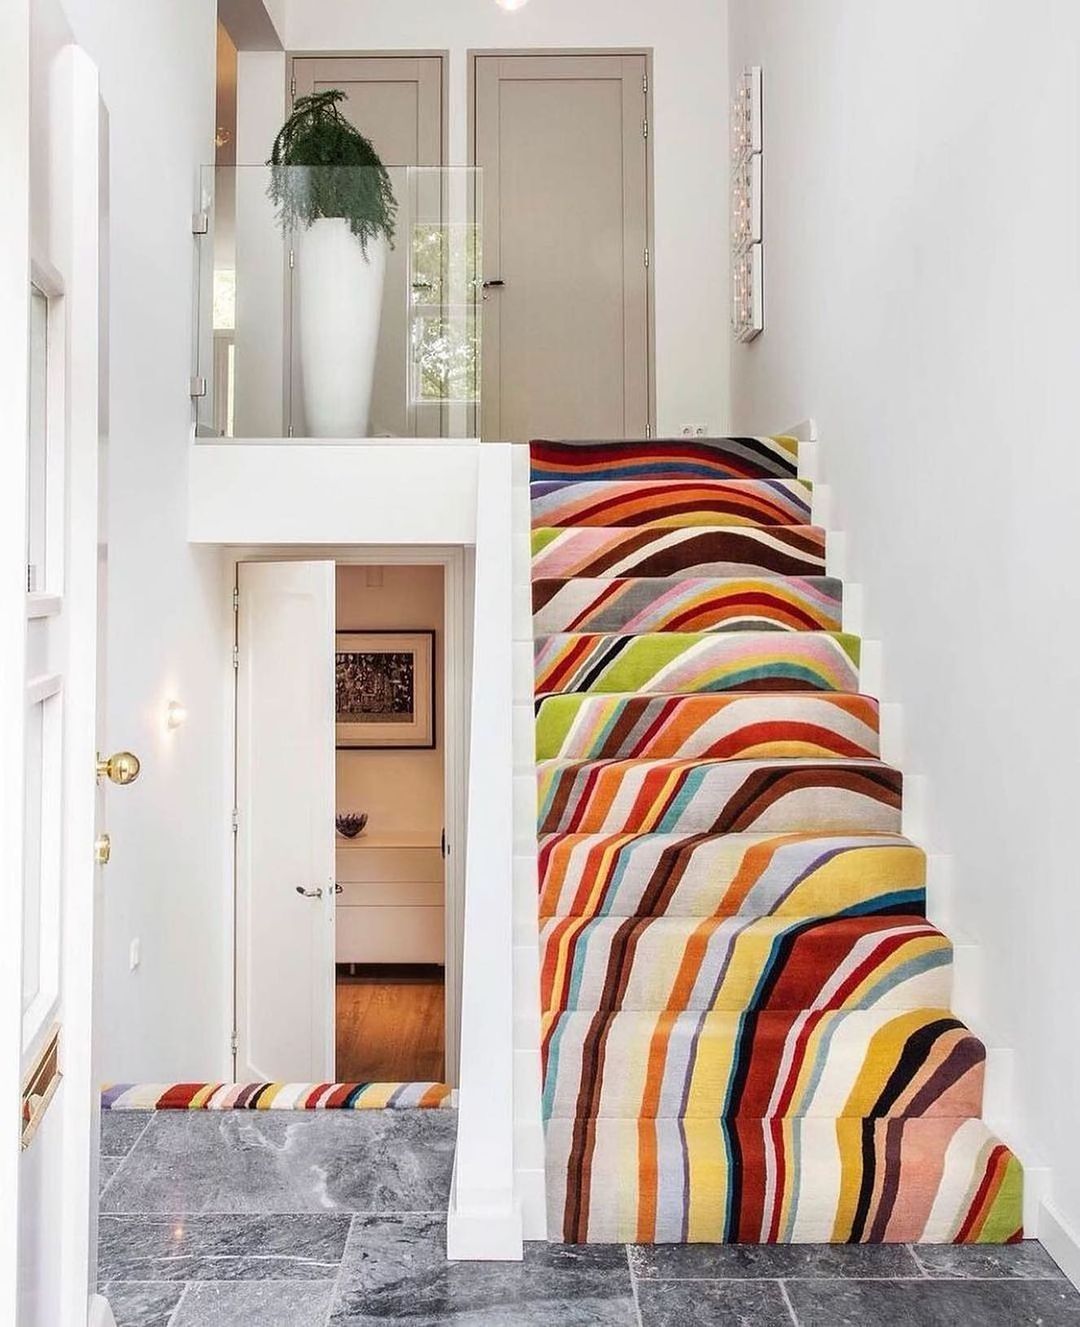 Custom Swirl Runner by Paul Smith featured in a project by DOEN Design